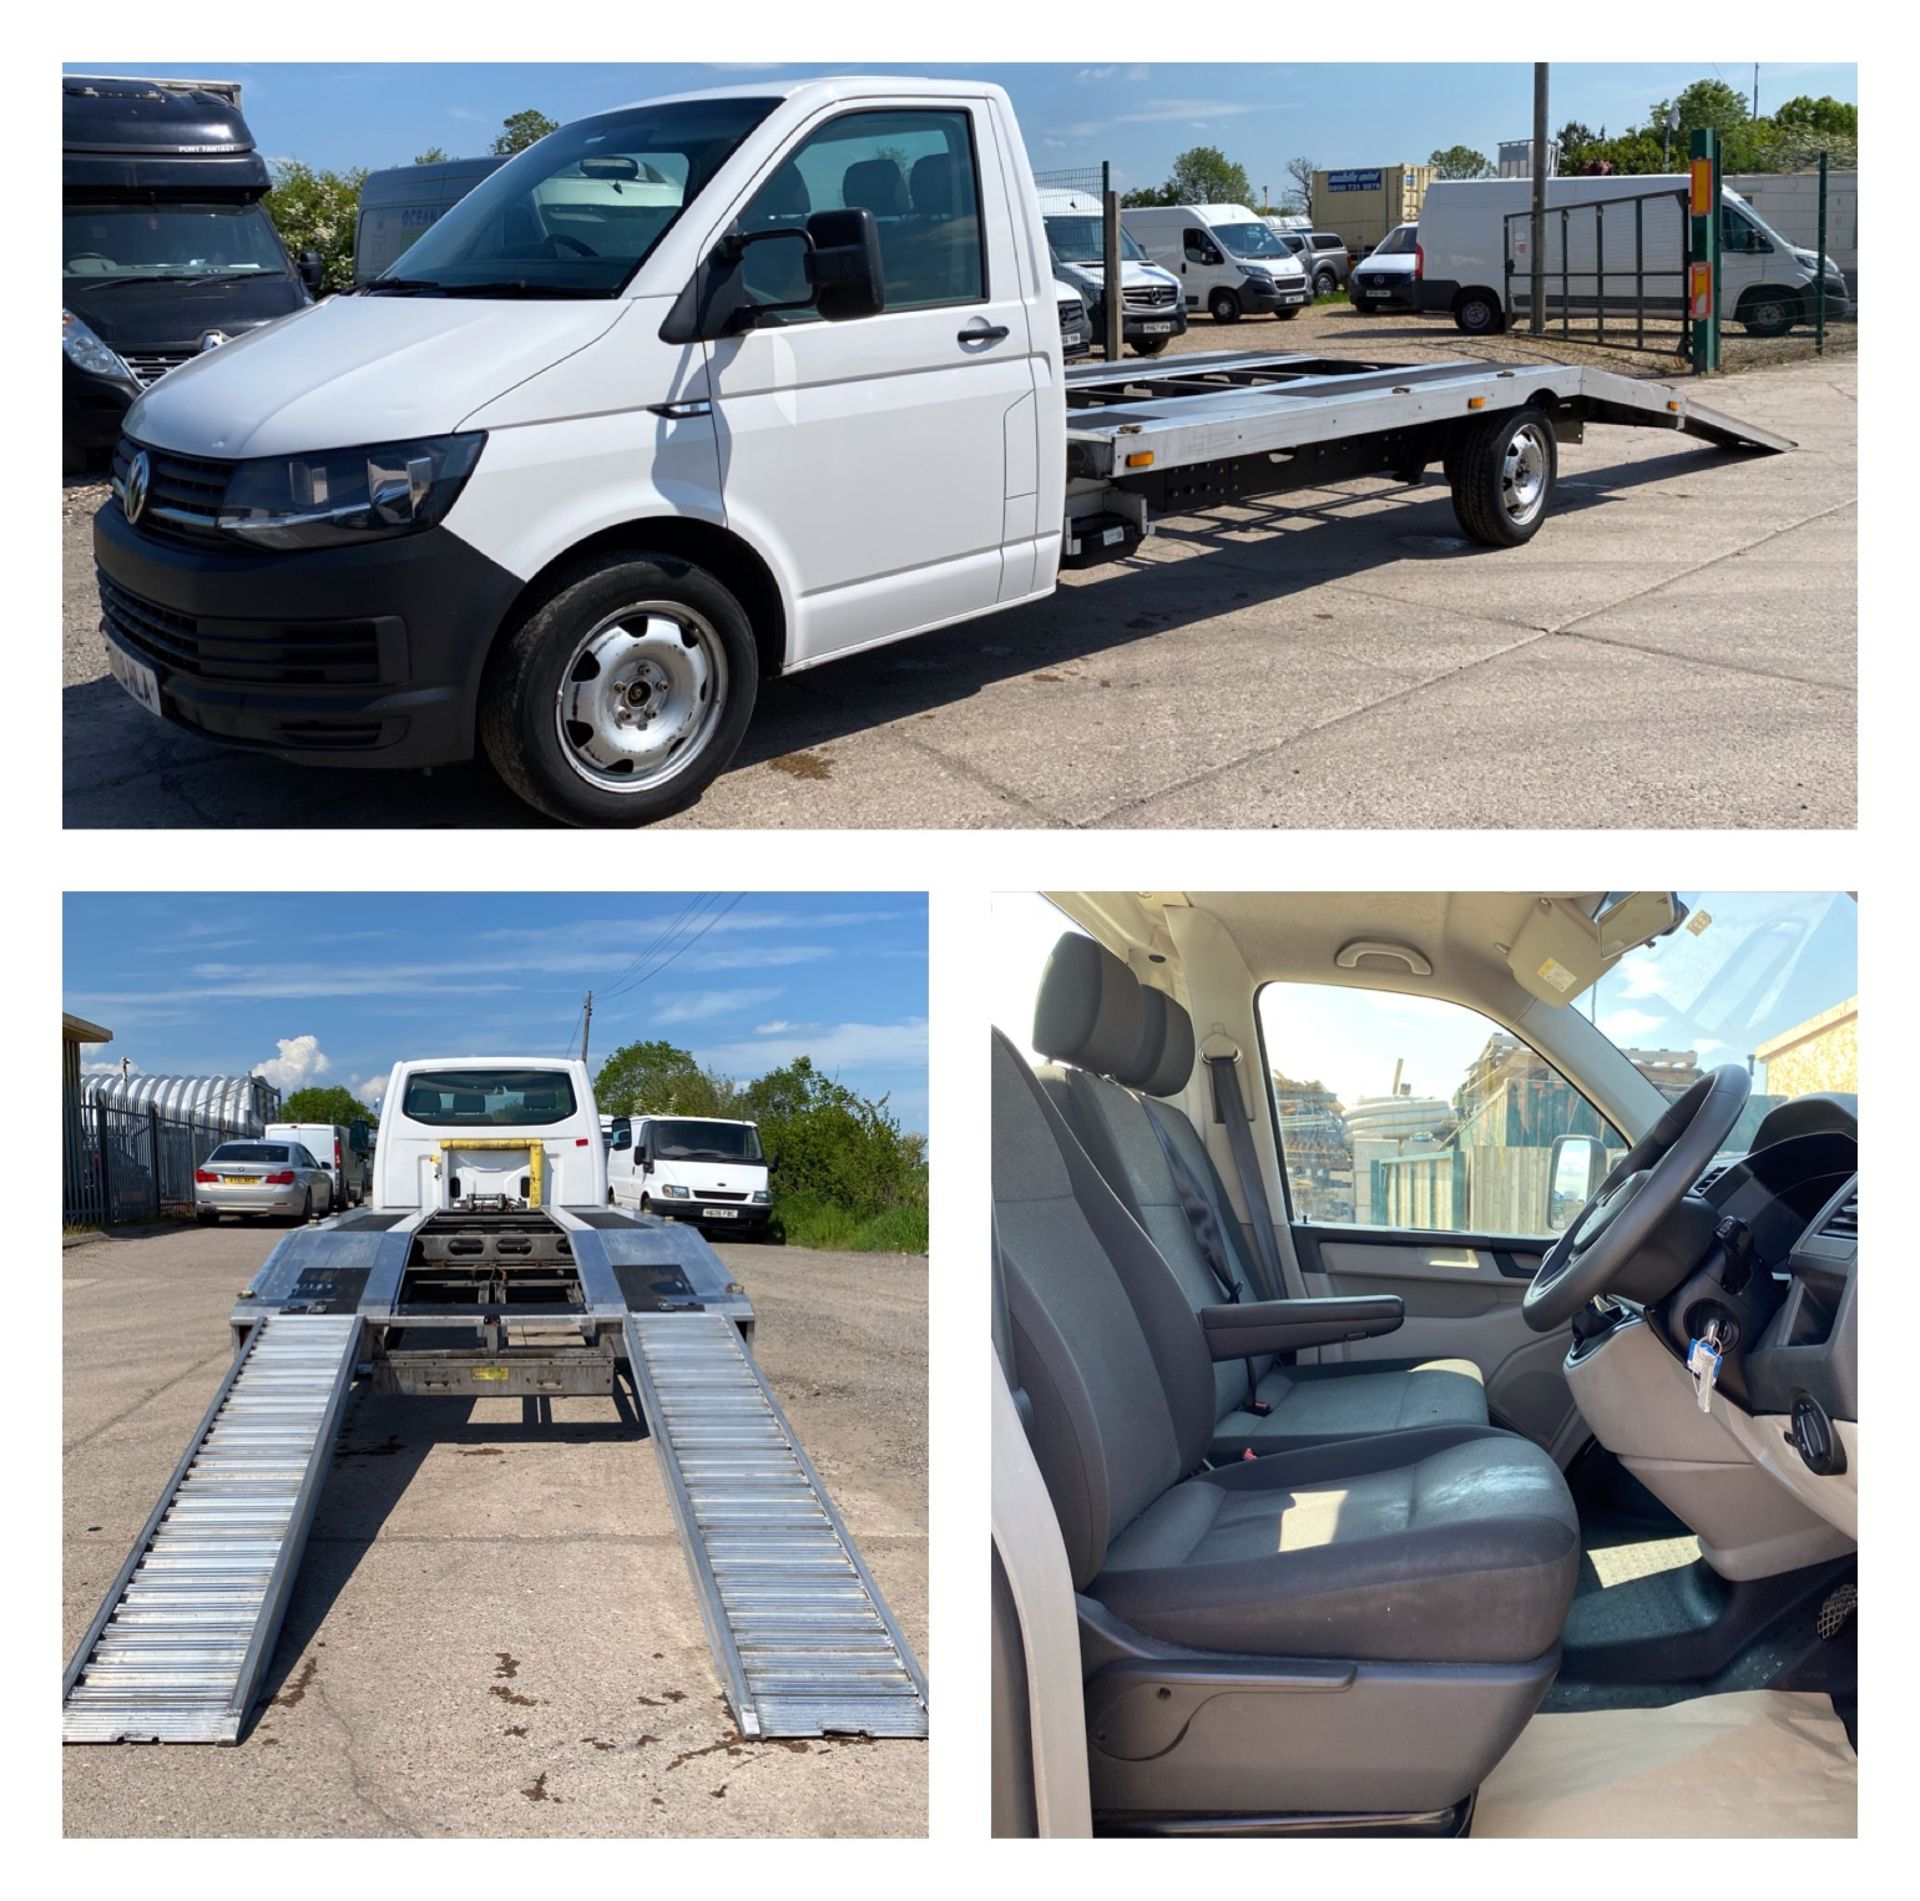 VOLKSWAGEN TRANSPORTER 2.0TDI "RECOVERY / TRANSPORTER" 1 OWNER *EURO 6* AIR CON - ELEC PACK *RARE*